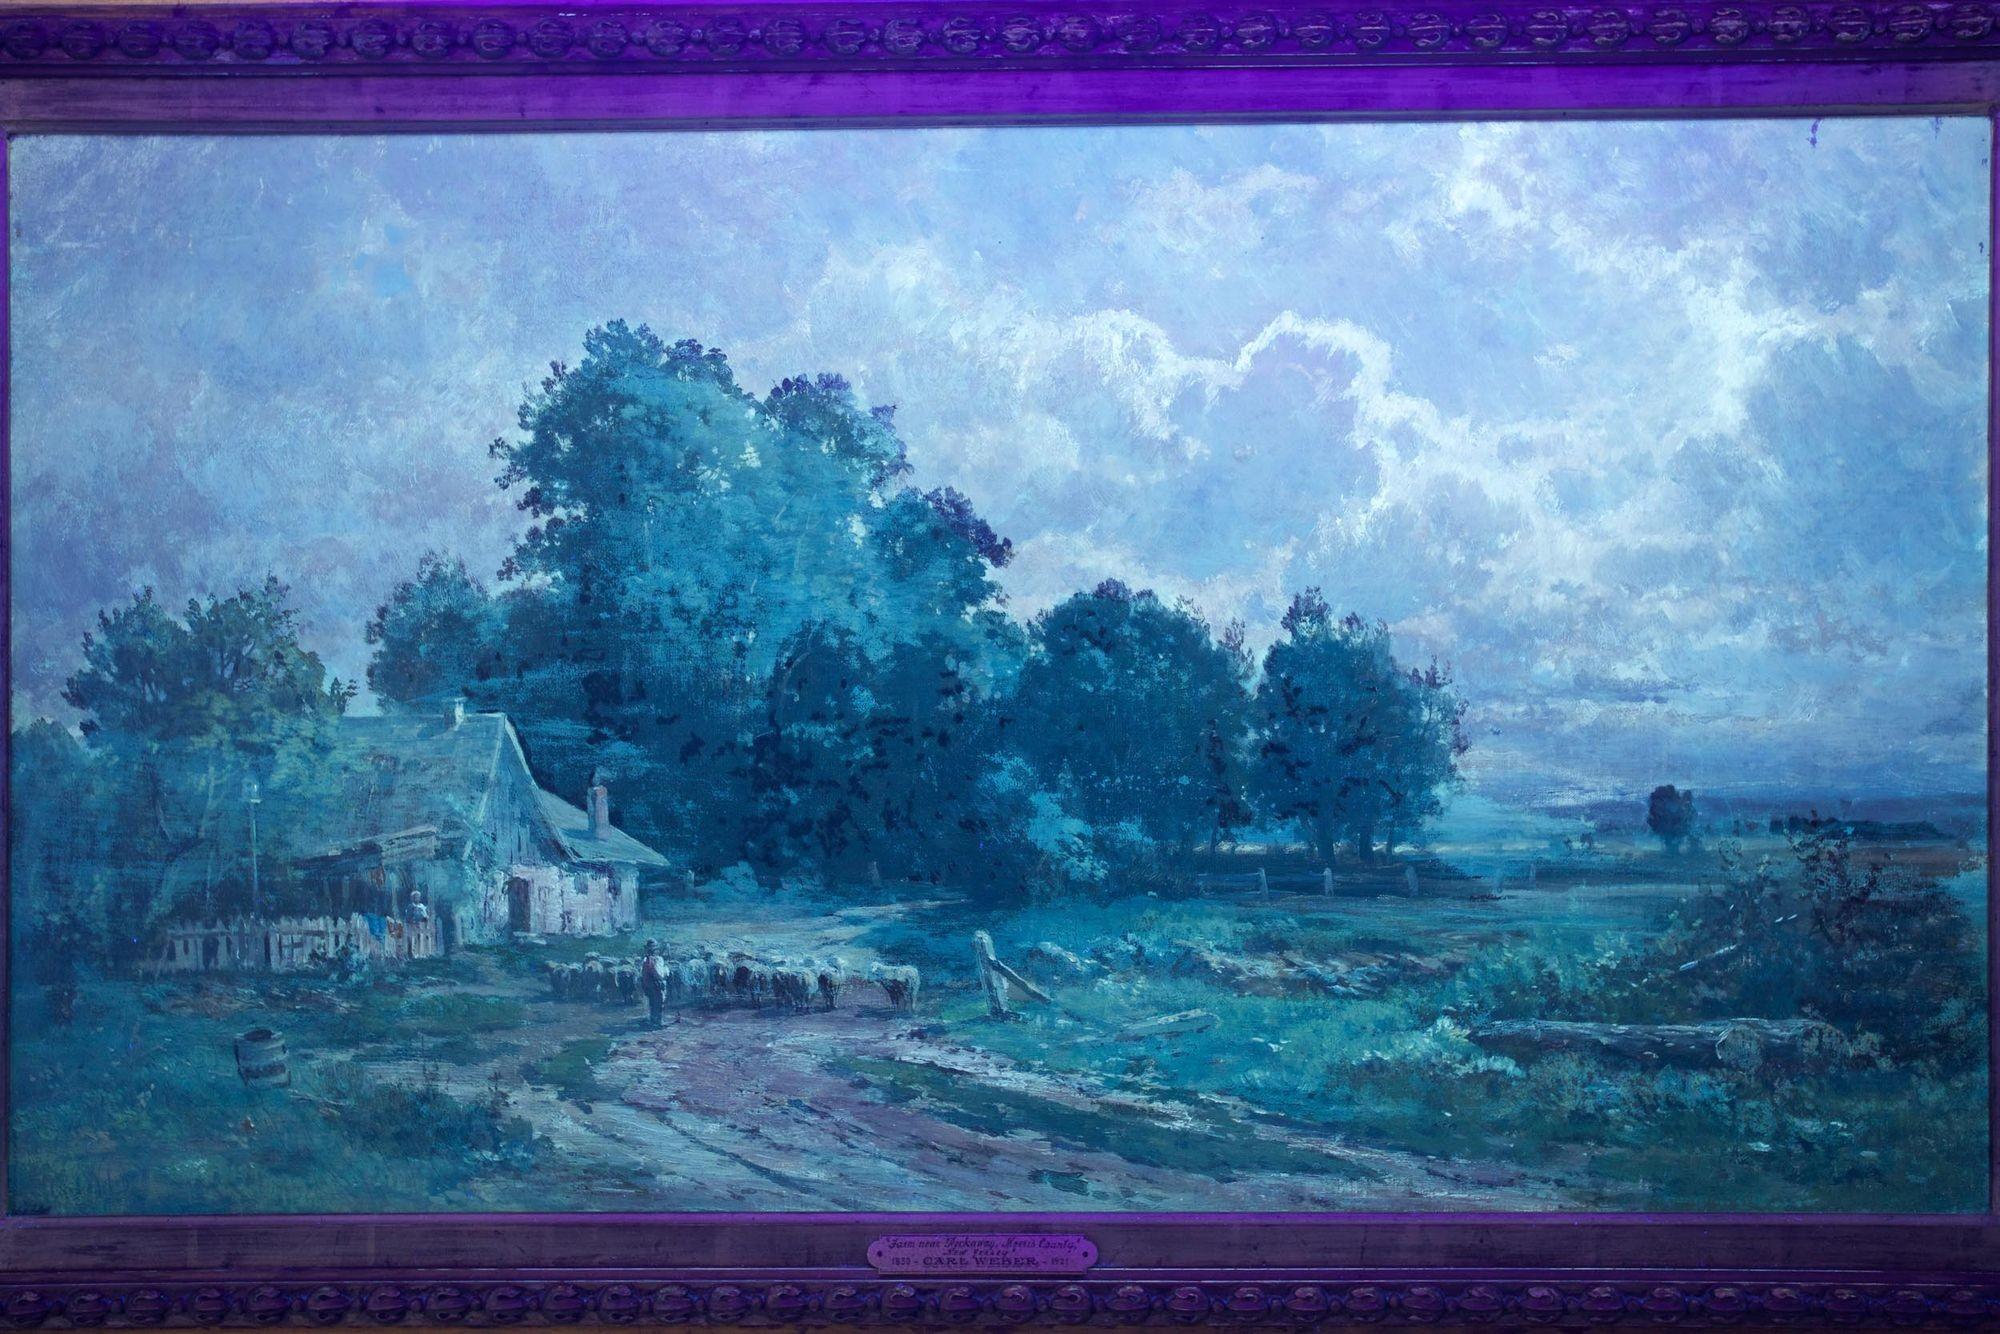 American Landscape Painting 